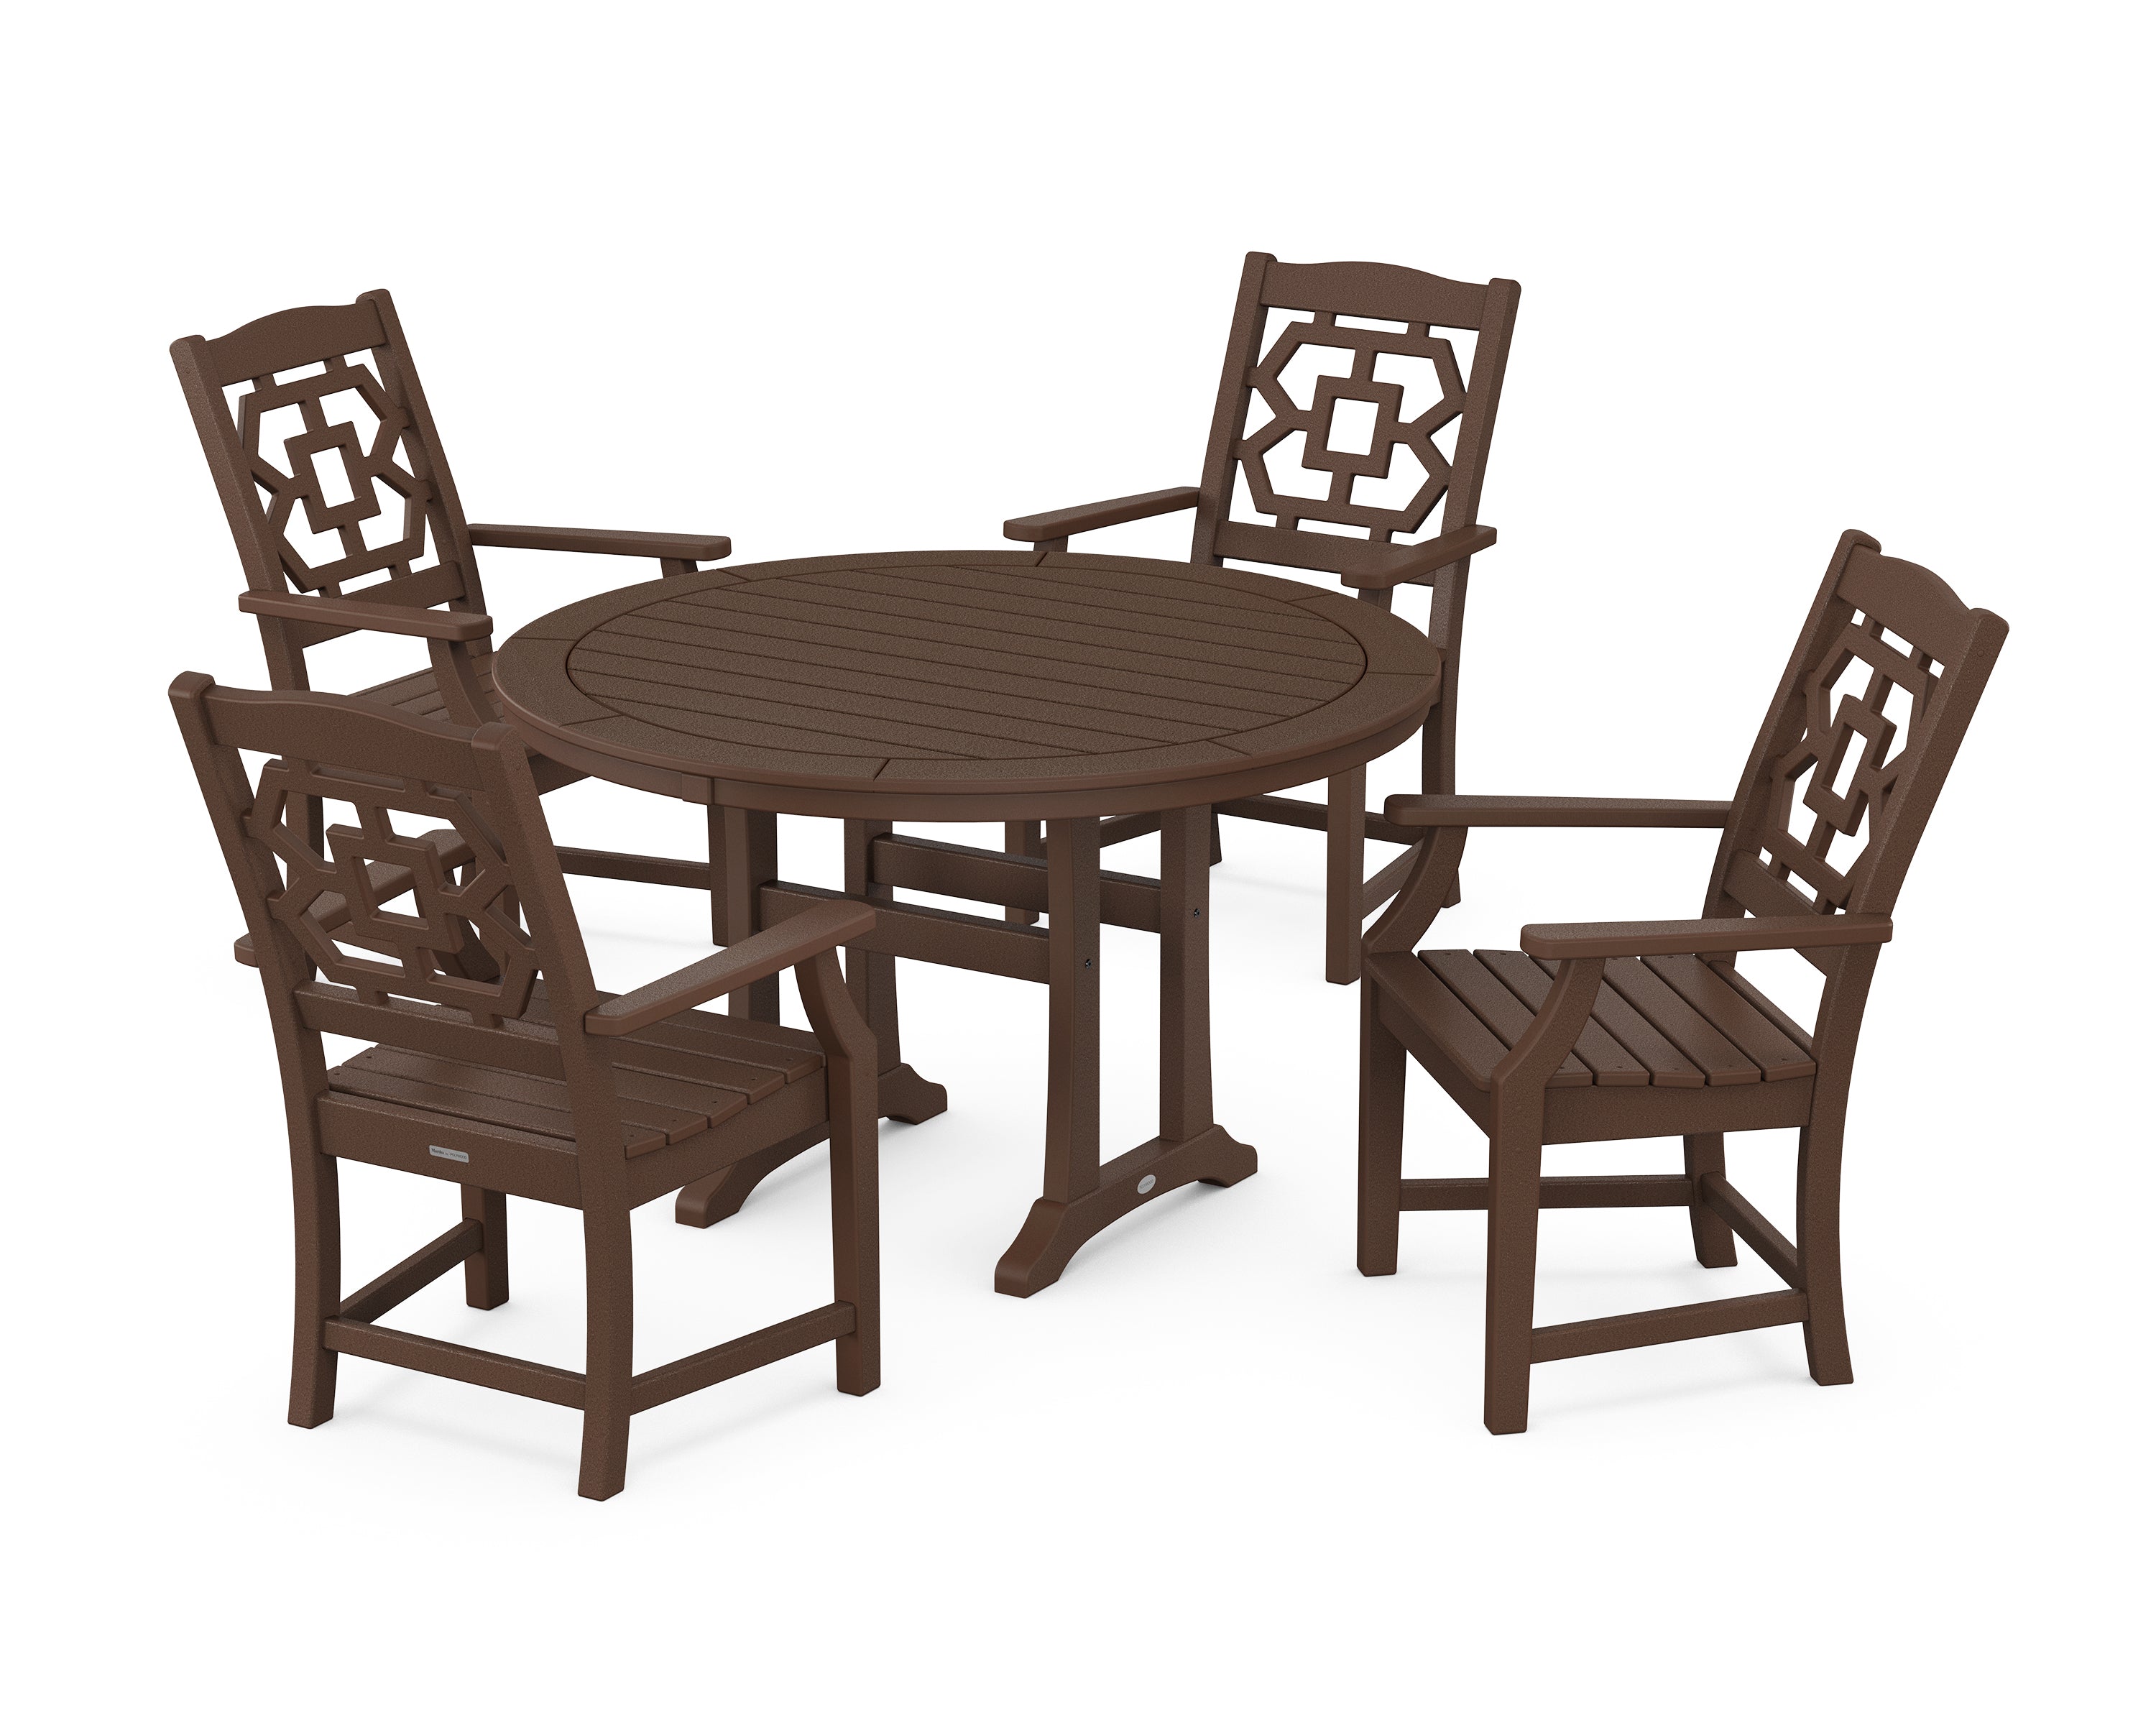 Martha Stewart by POLYWOOD® Chinoiserie 5-Piece Round Dining Set with Trestle Legs in Mahogany